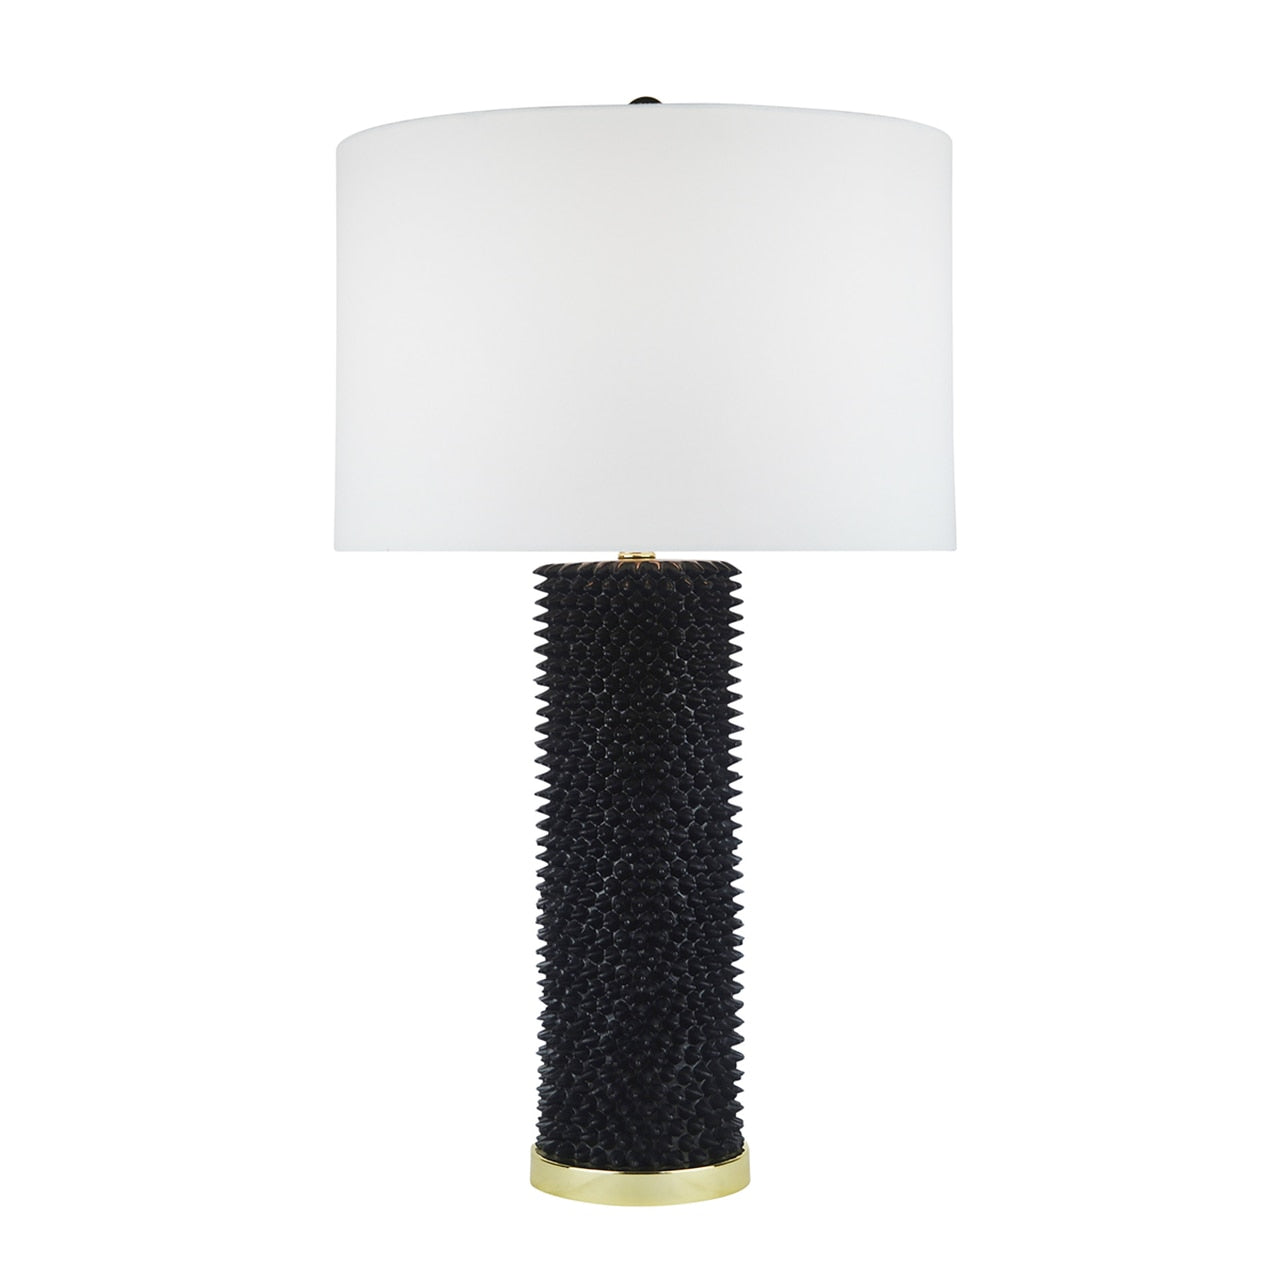 Resin Spiked Table Lamp - Black